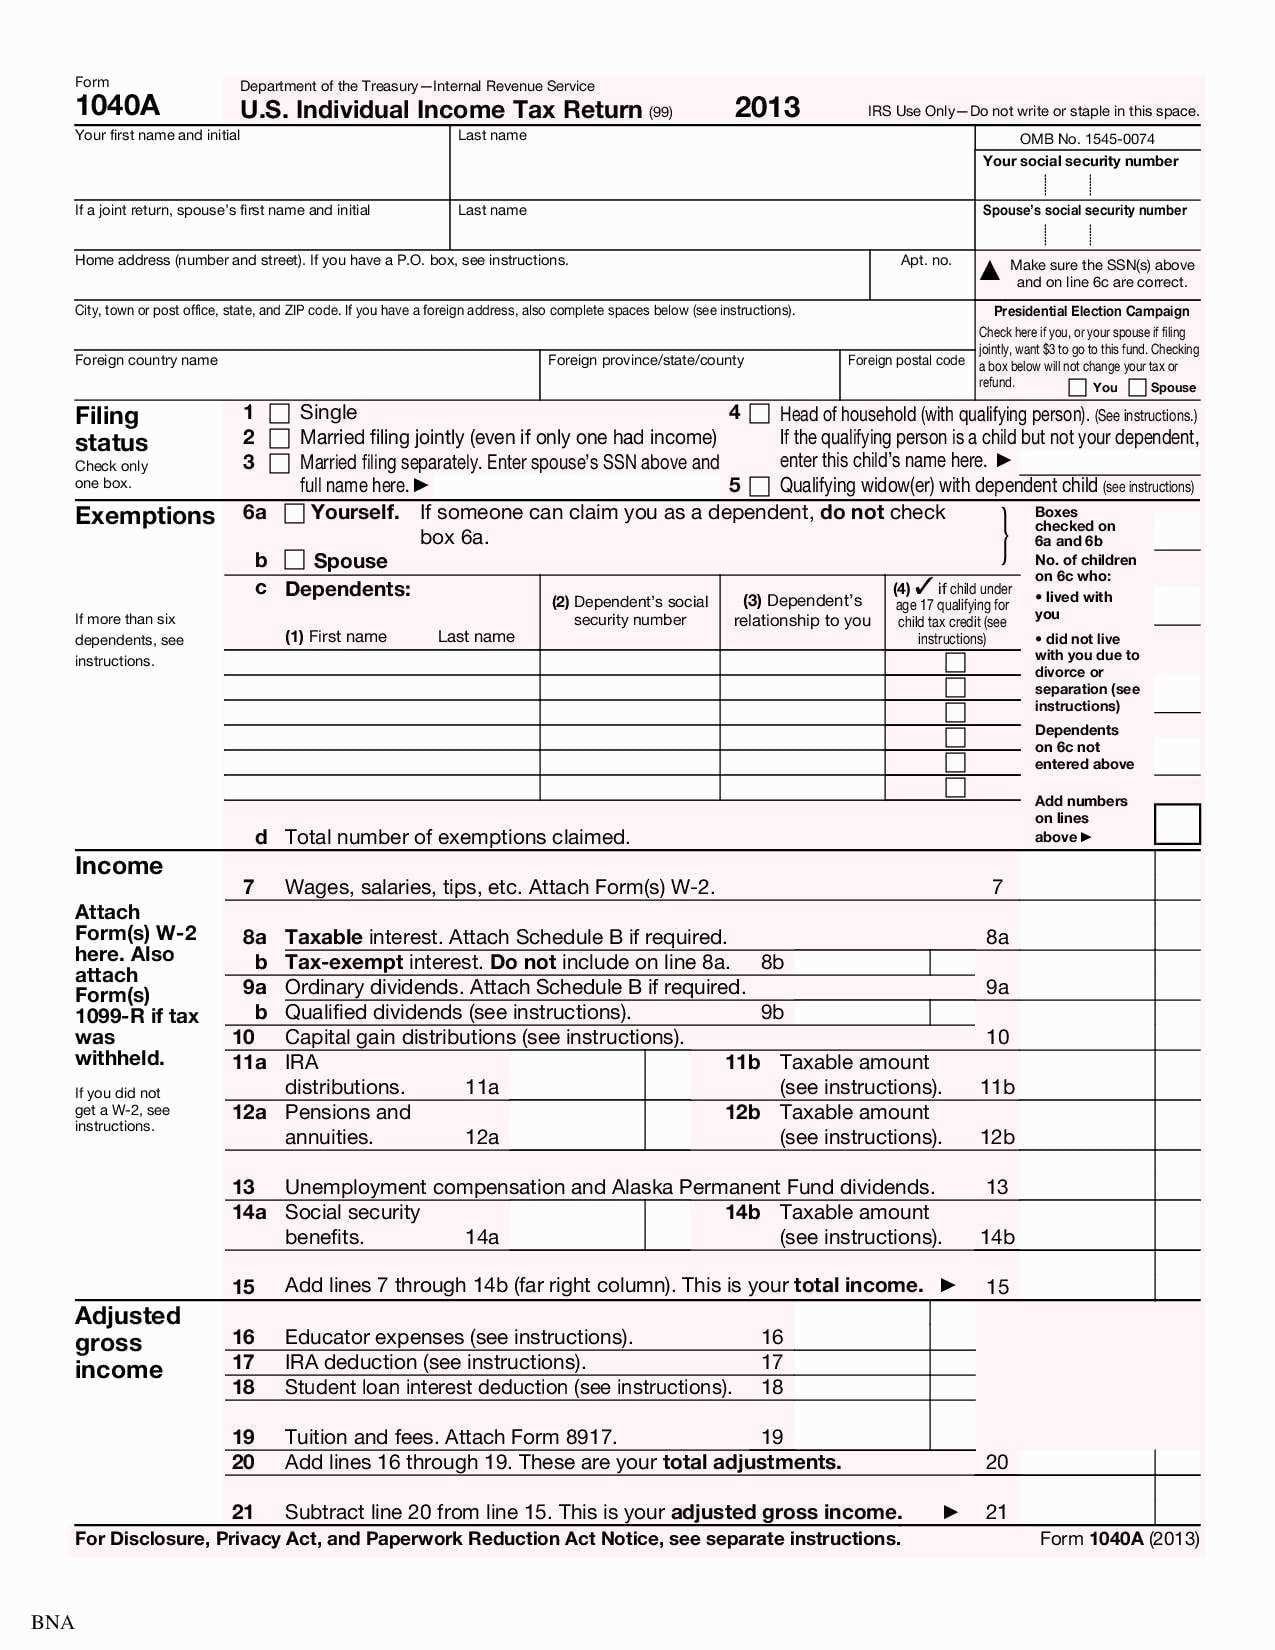 Qualified Dividends And Capital Gain Tax Worksheet 2016 One Step Also Qualified Dividends And Capital Gain Tax Worksheet